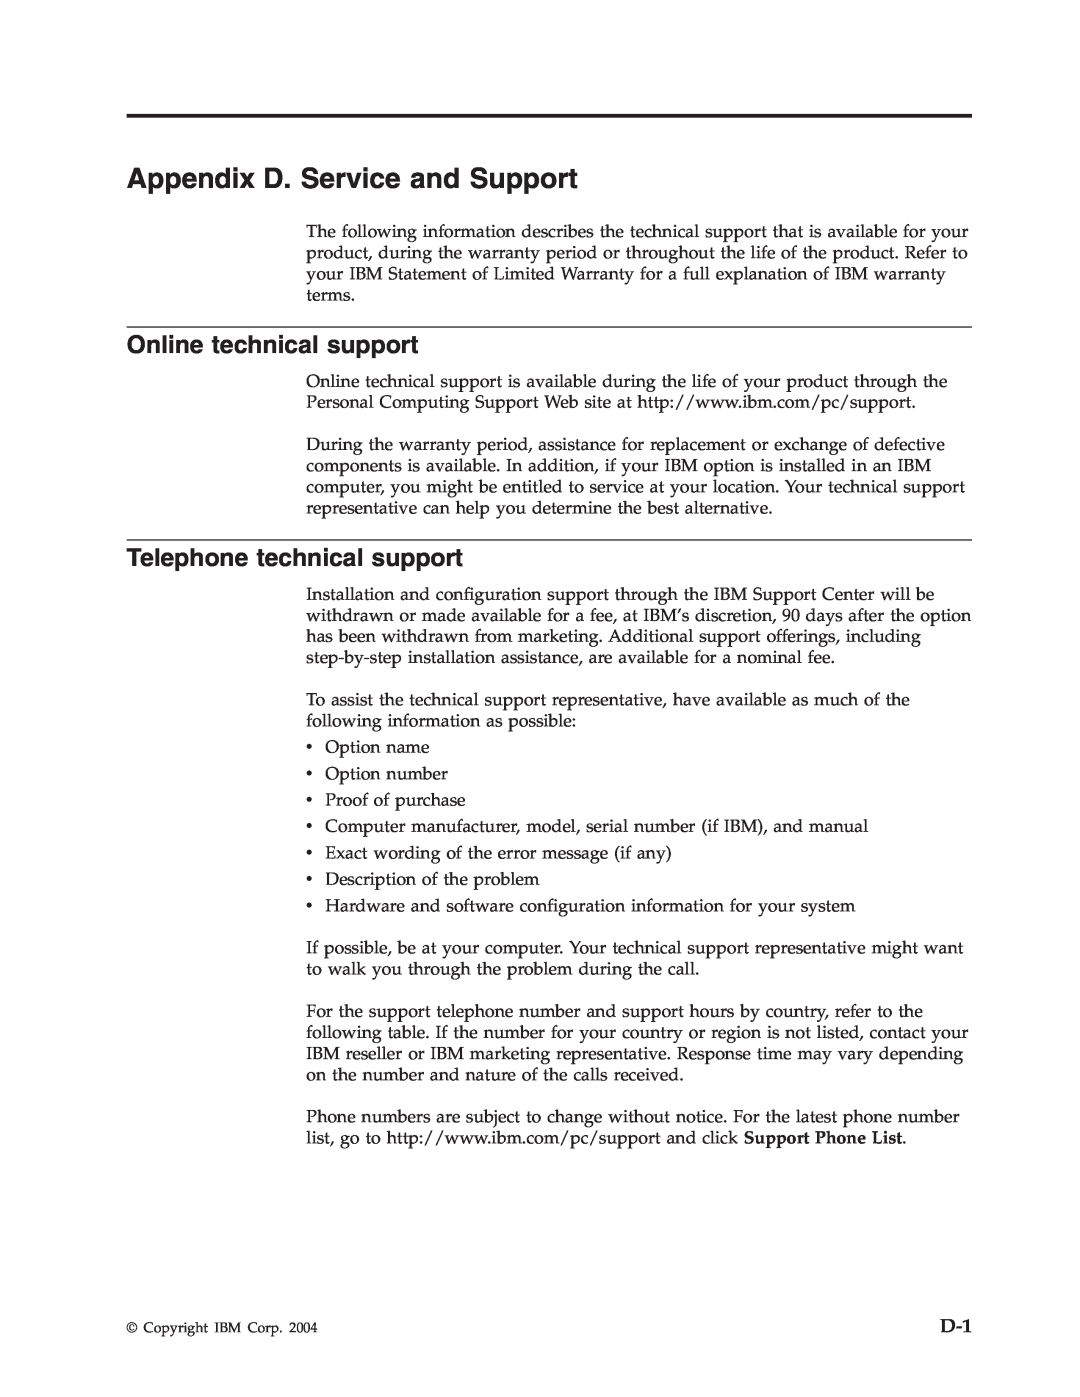 IBM PROJECTOR C400 manual Appendix D. Service and Support, Online technical support, Telephone technical support 